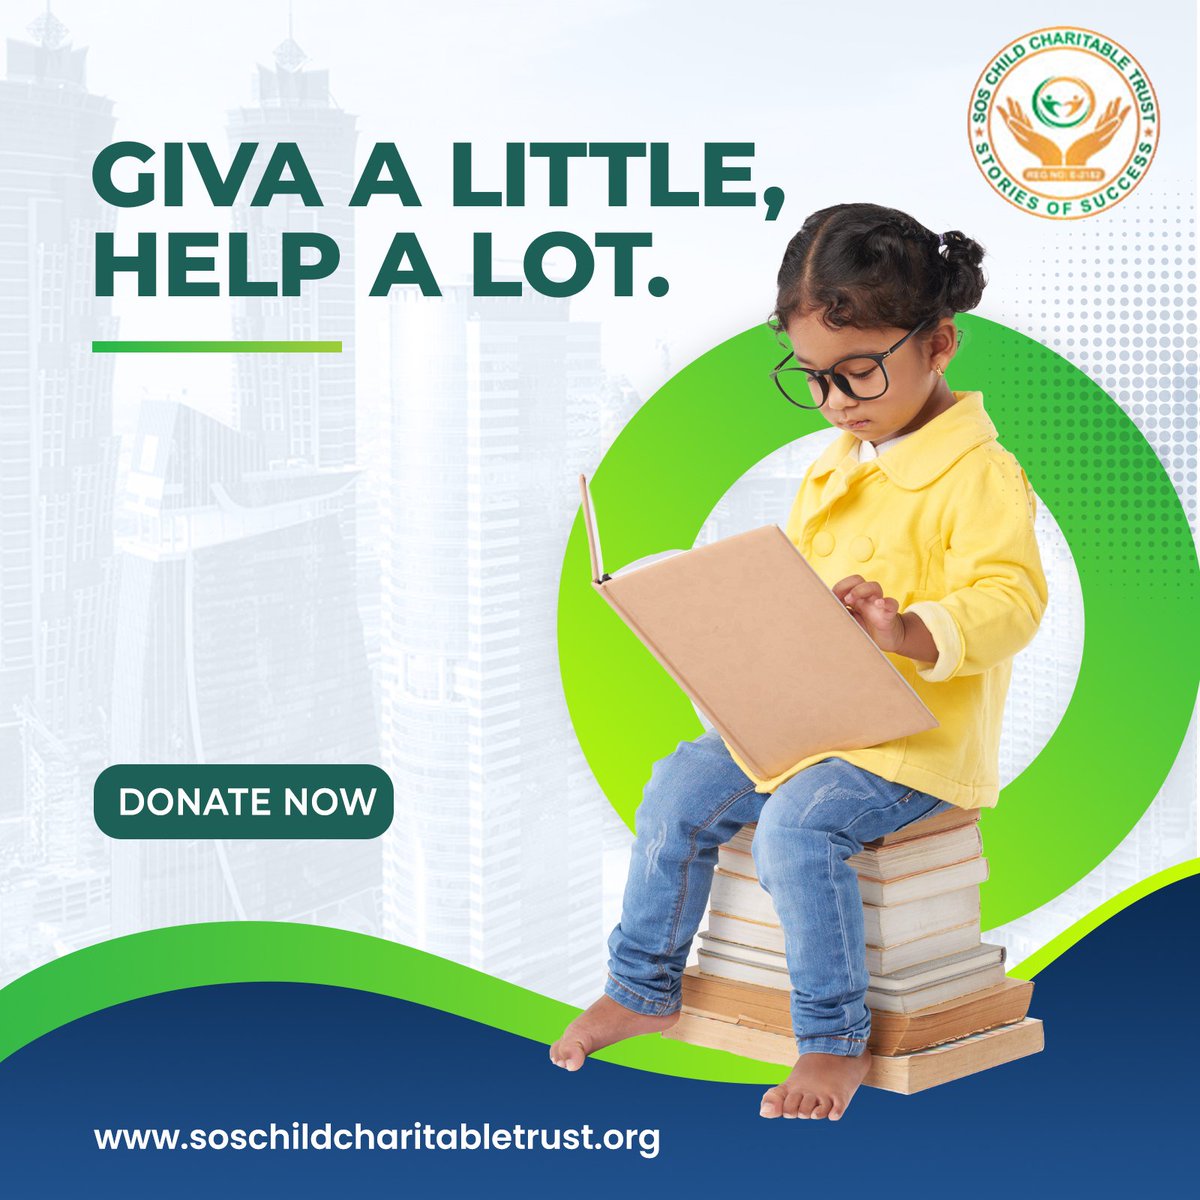 SOS believes that education is a key to giving the visually impaired a self-reliant and dignified life.

#helpinghandicap #handicap #educationtransforms #empowerchildren #SOS #wecanhelp #ngo #nongovernmental #Support #Community #Love #GivingBack #Children #DoGood #ngoindia #NGO